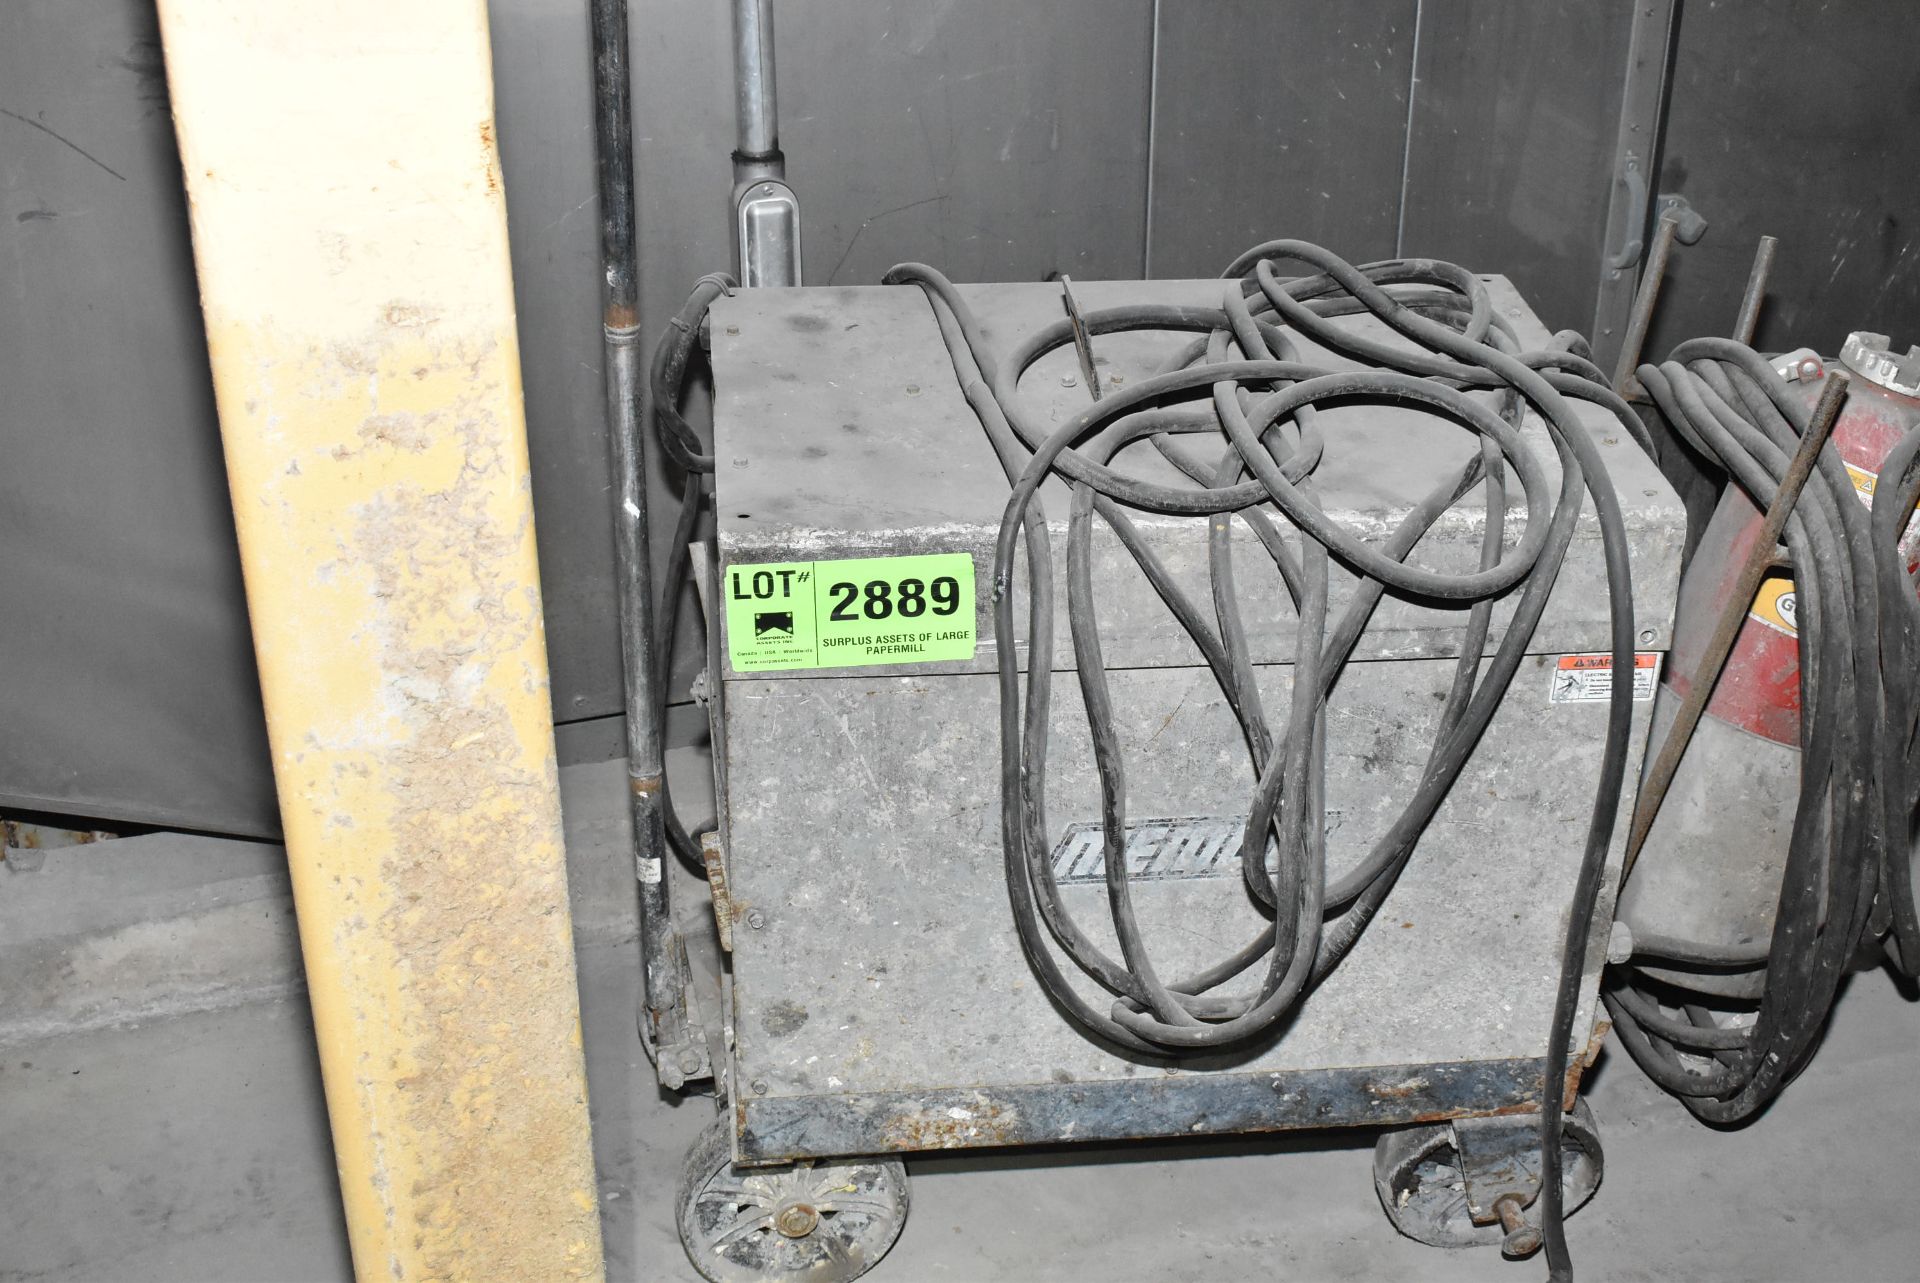 MEMCO AC/DC 250 PORTABLE WELDING POWER SOURCE WITH CABLES, S/N: N/A [RIGGING FEE FOR LOT #2889 - $50